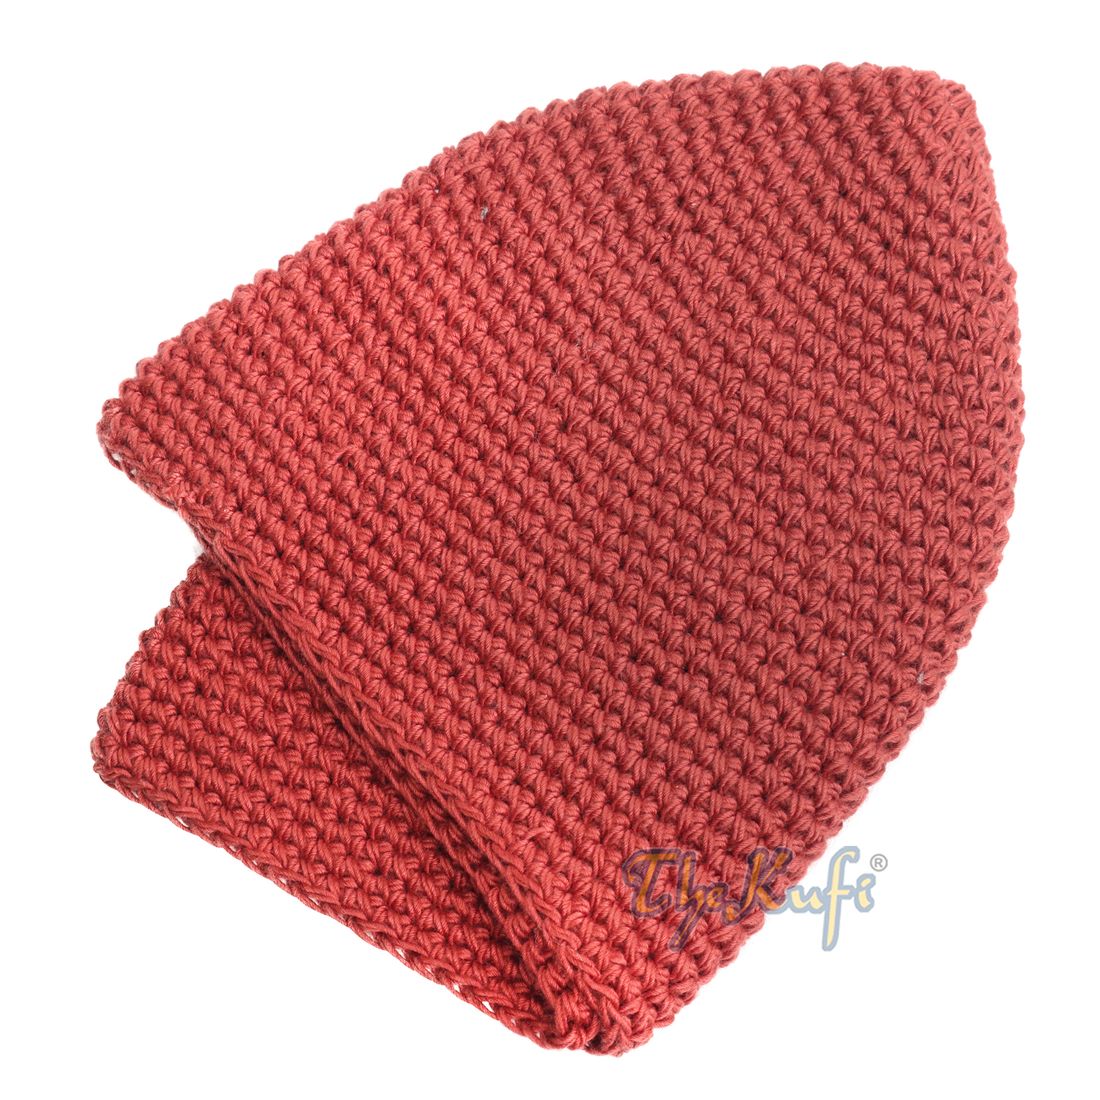 Plain Dark Red Hand-Crocheted 100% Cotton Kufi Hat Unique Design and Comfortable Fit